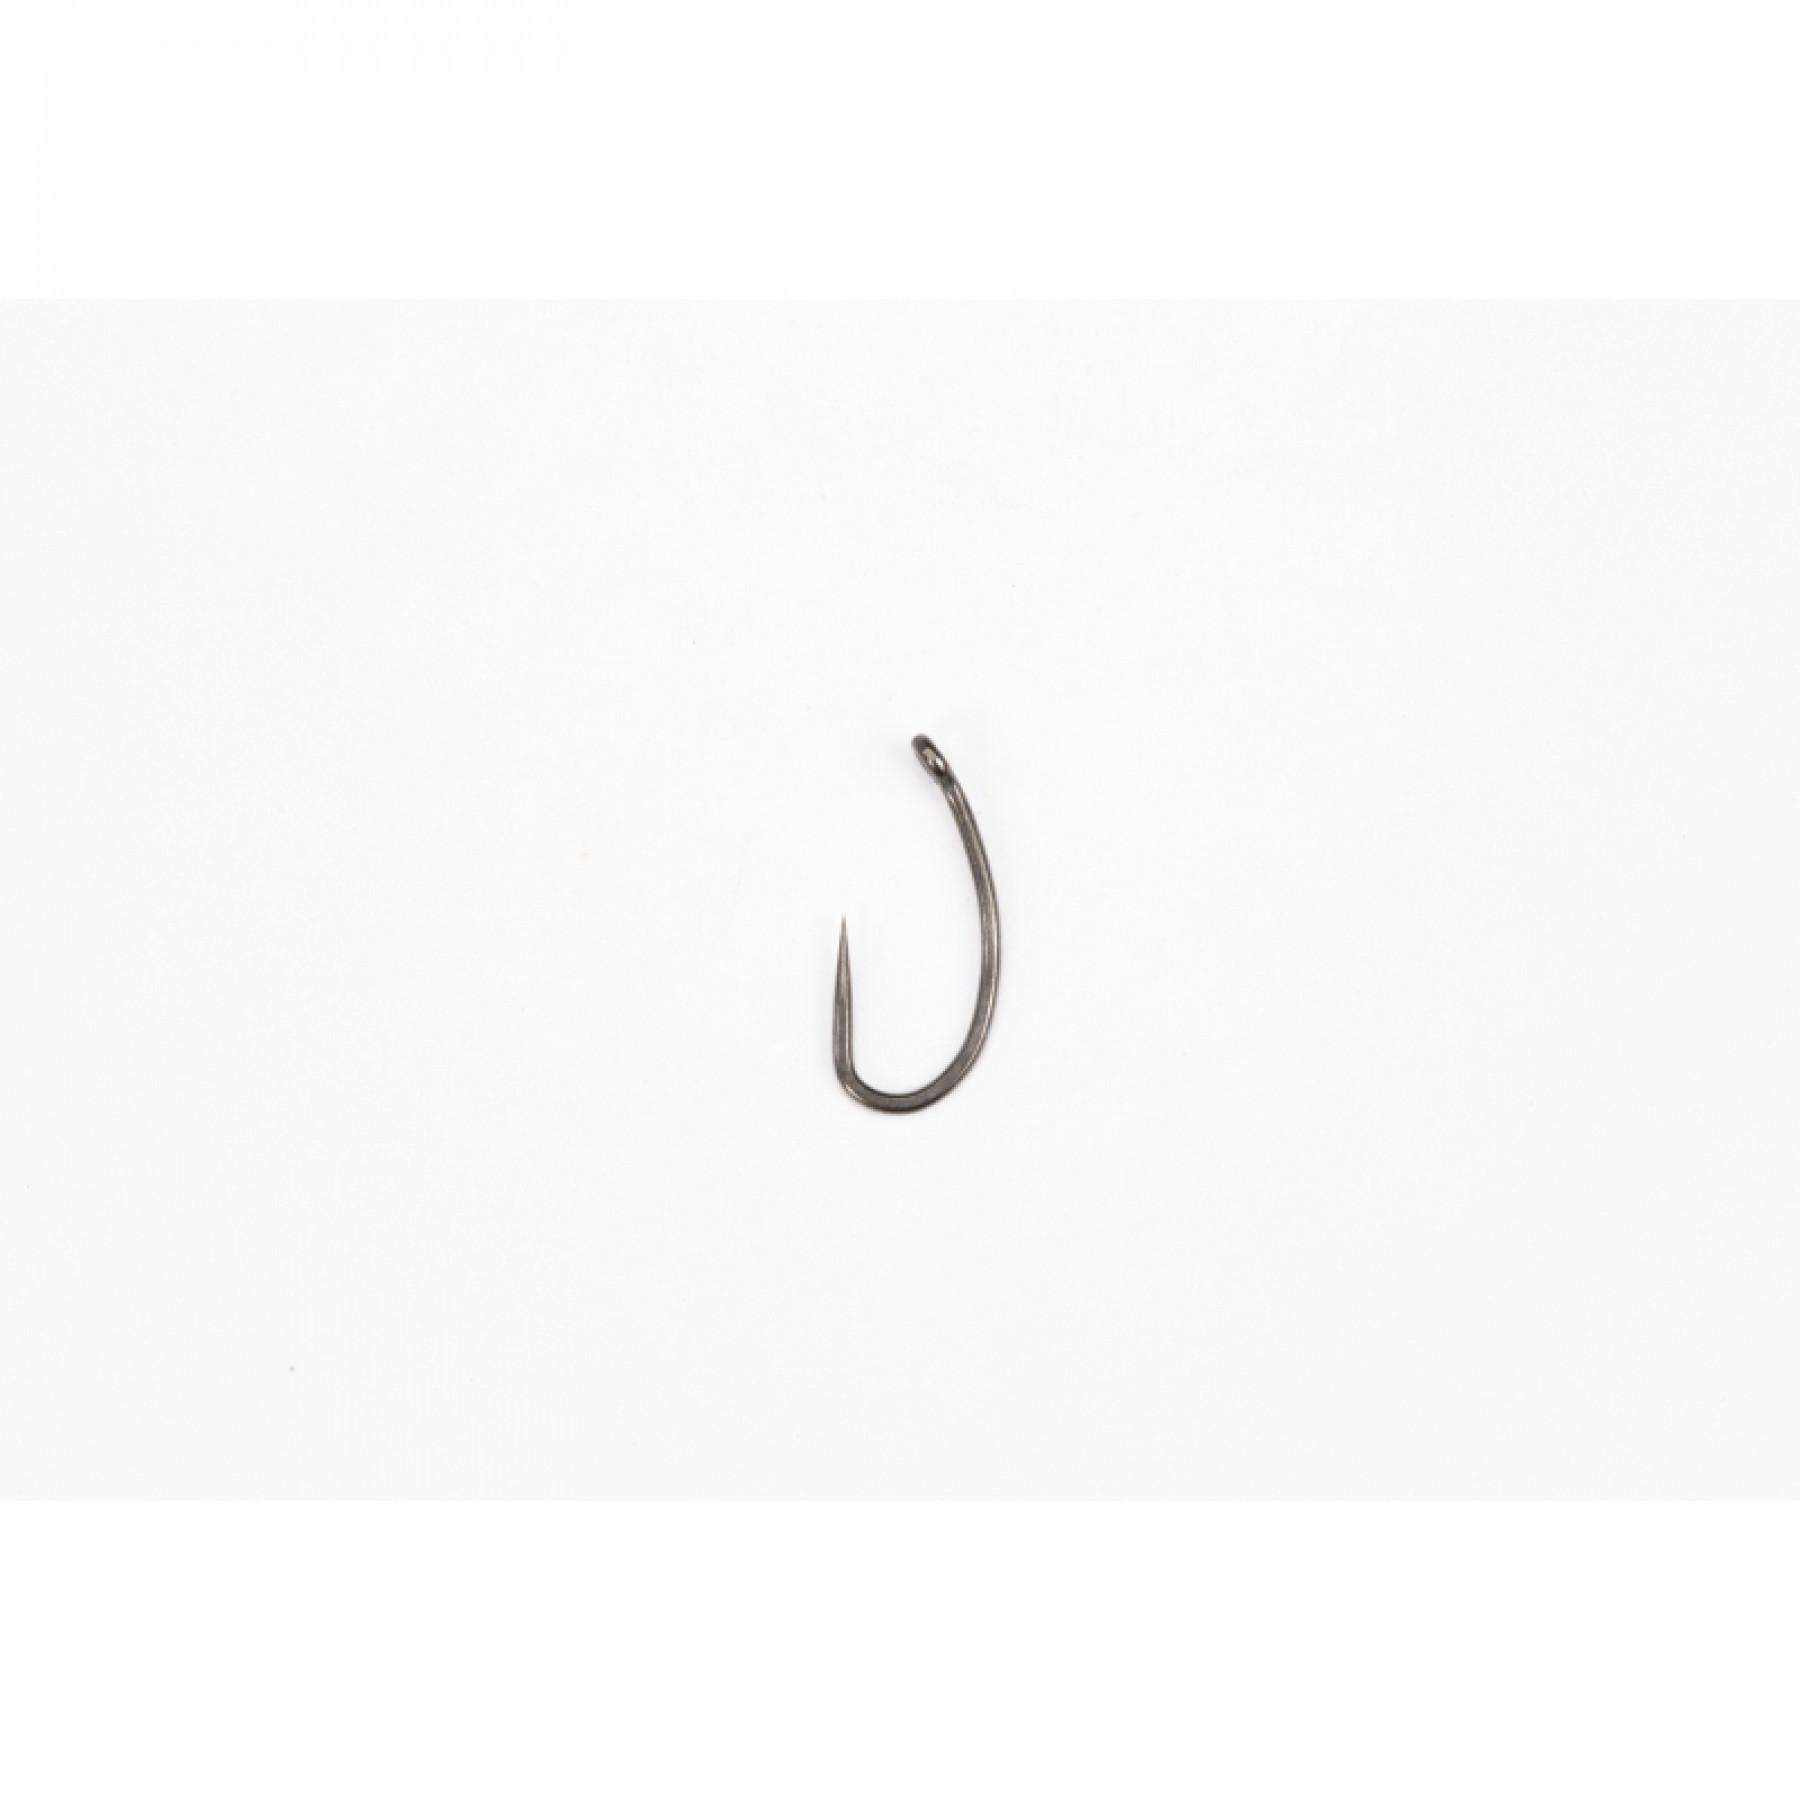 Hook Pinpoint Fang X size 8 without swivel